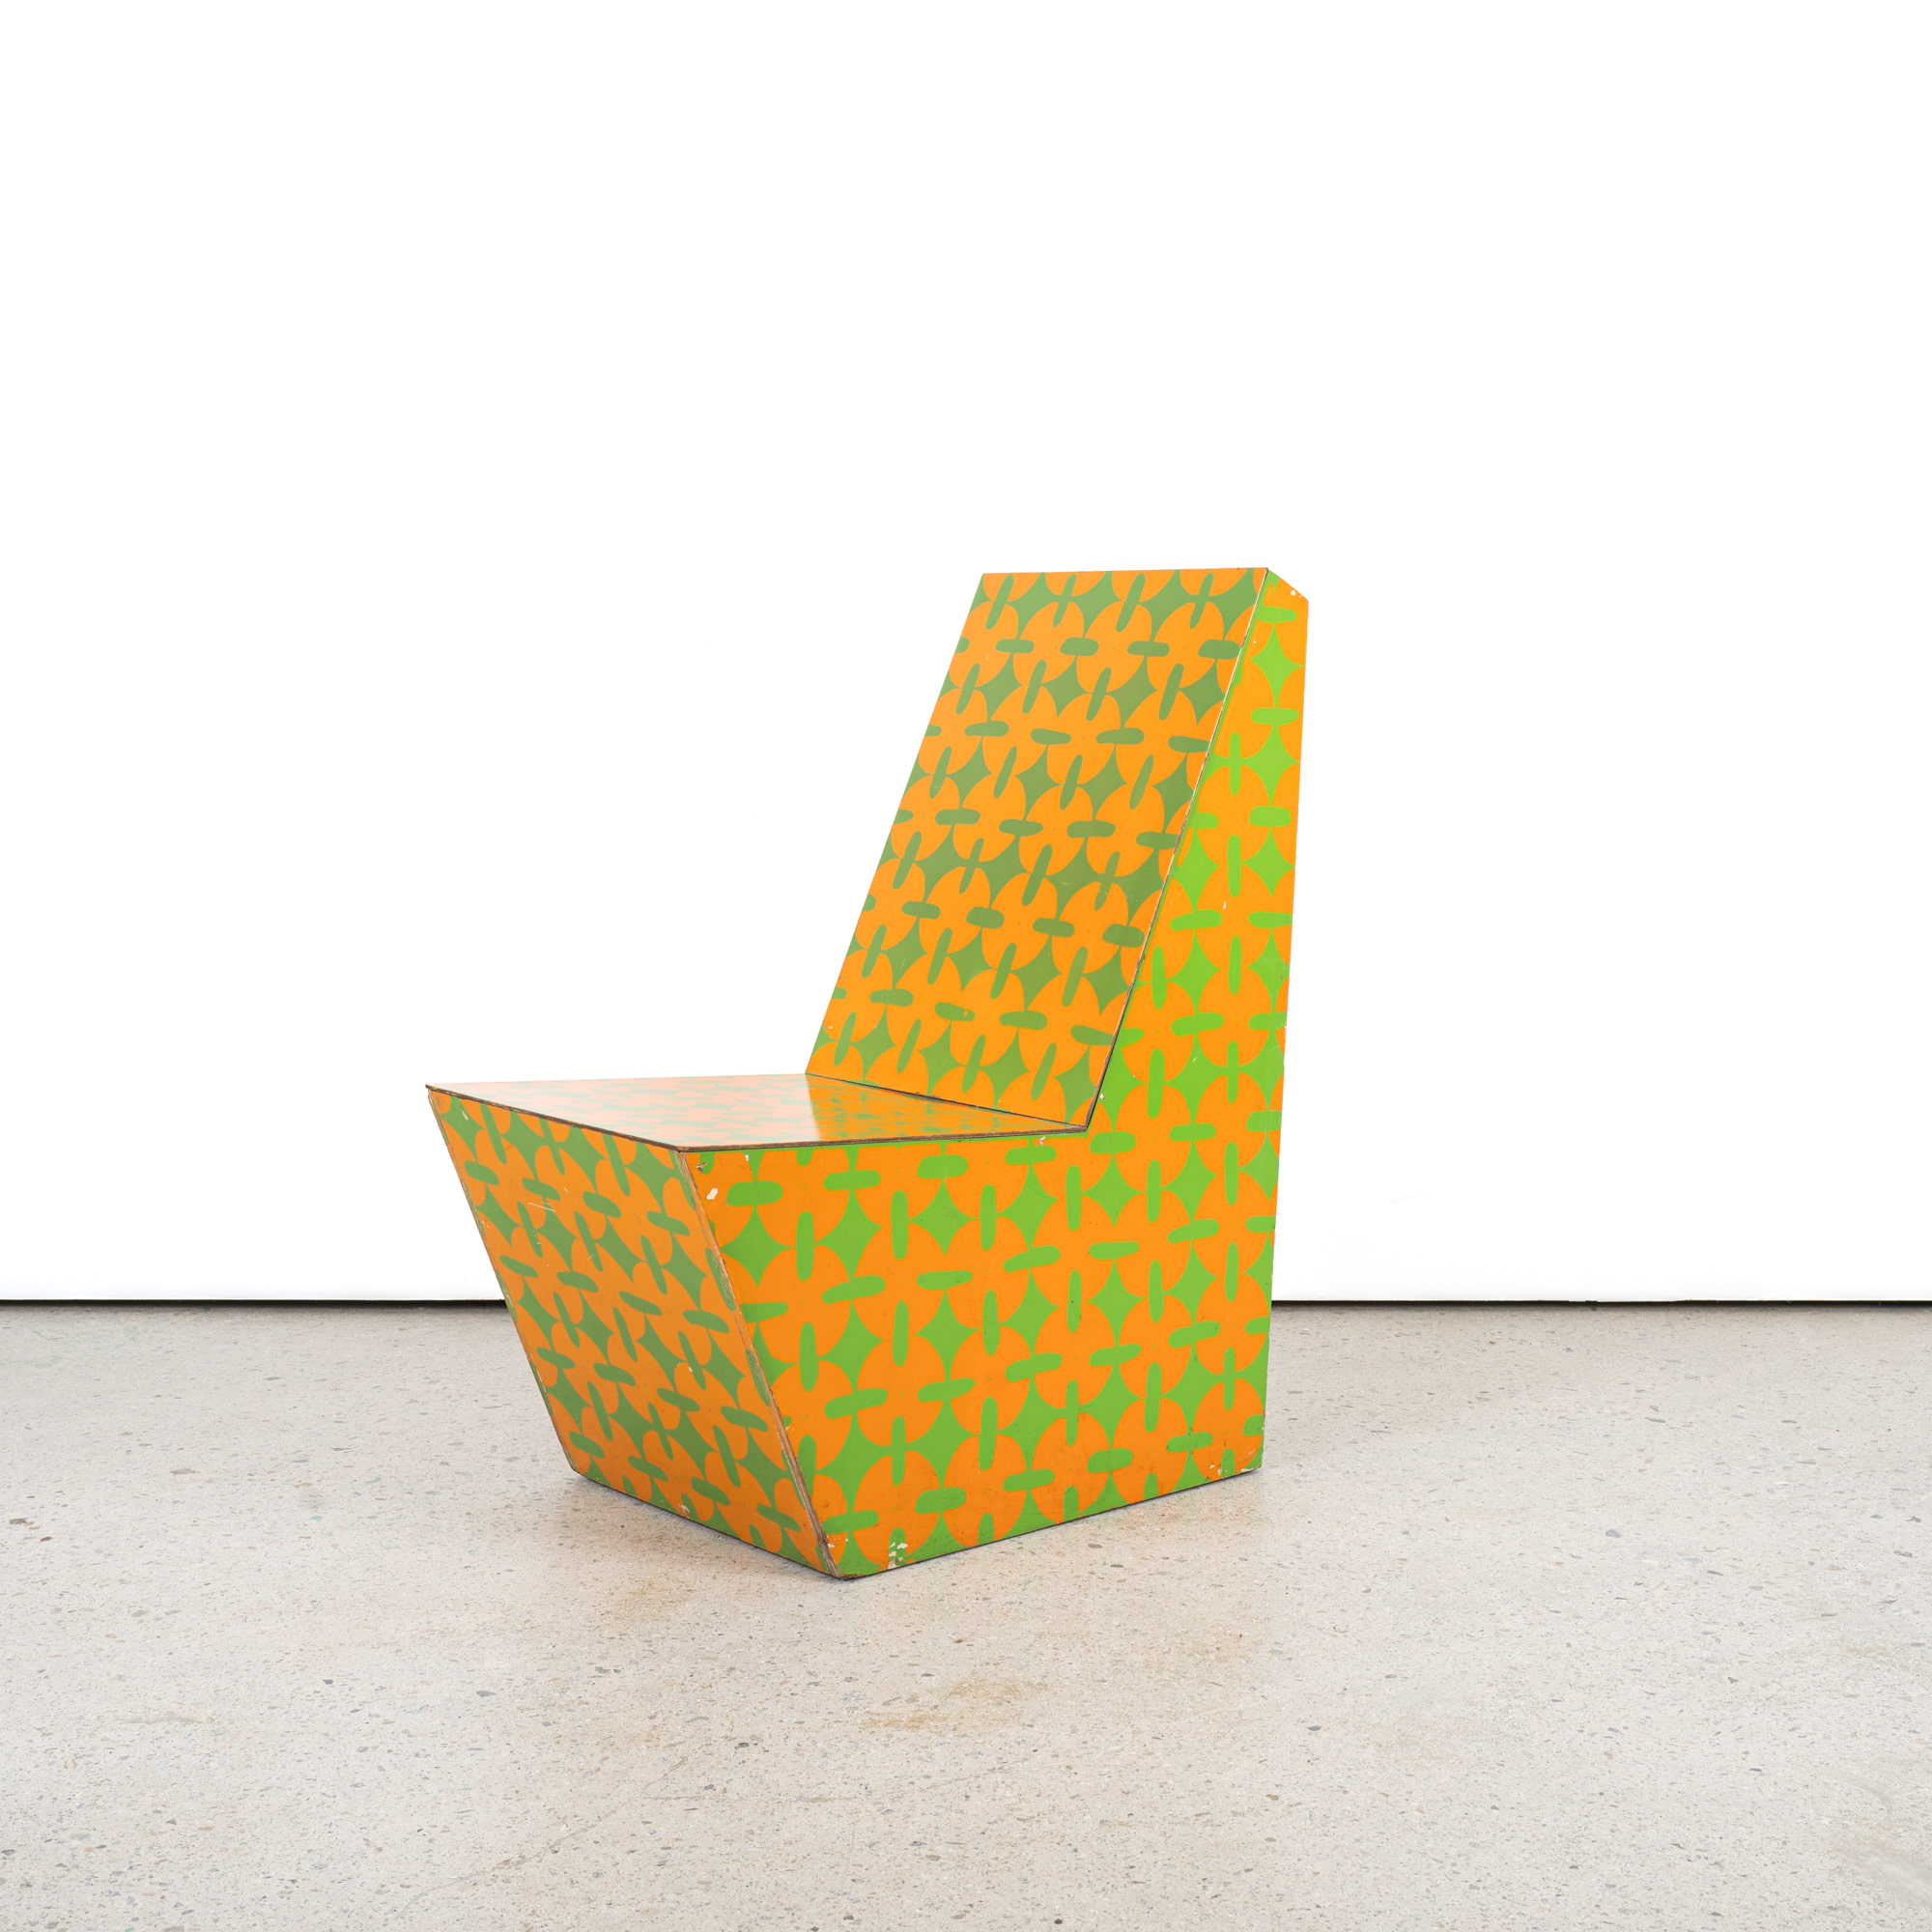 Painted Plywood Chair by Bill Bell